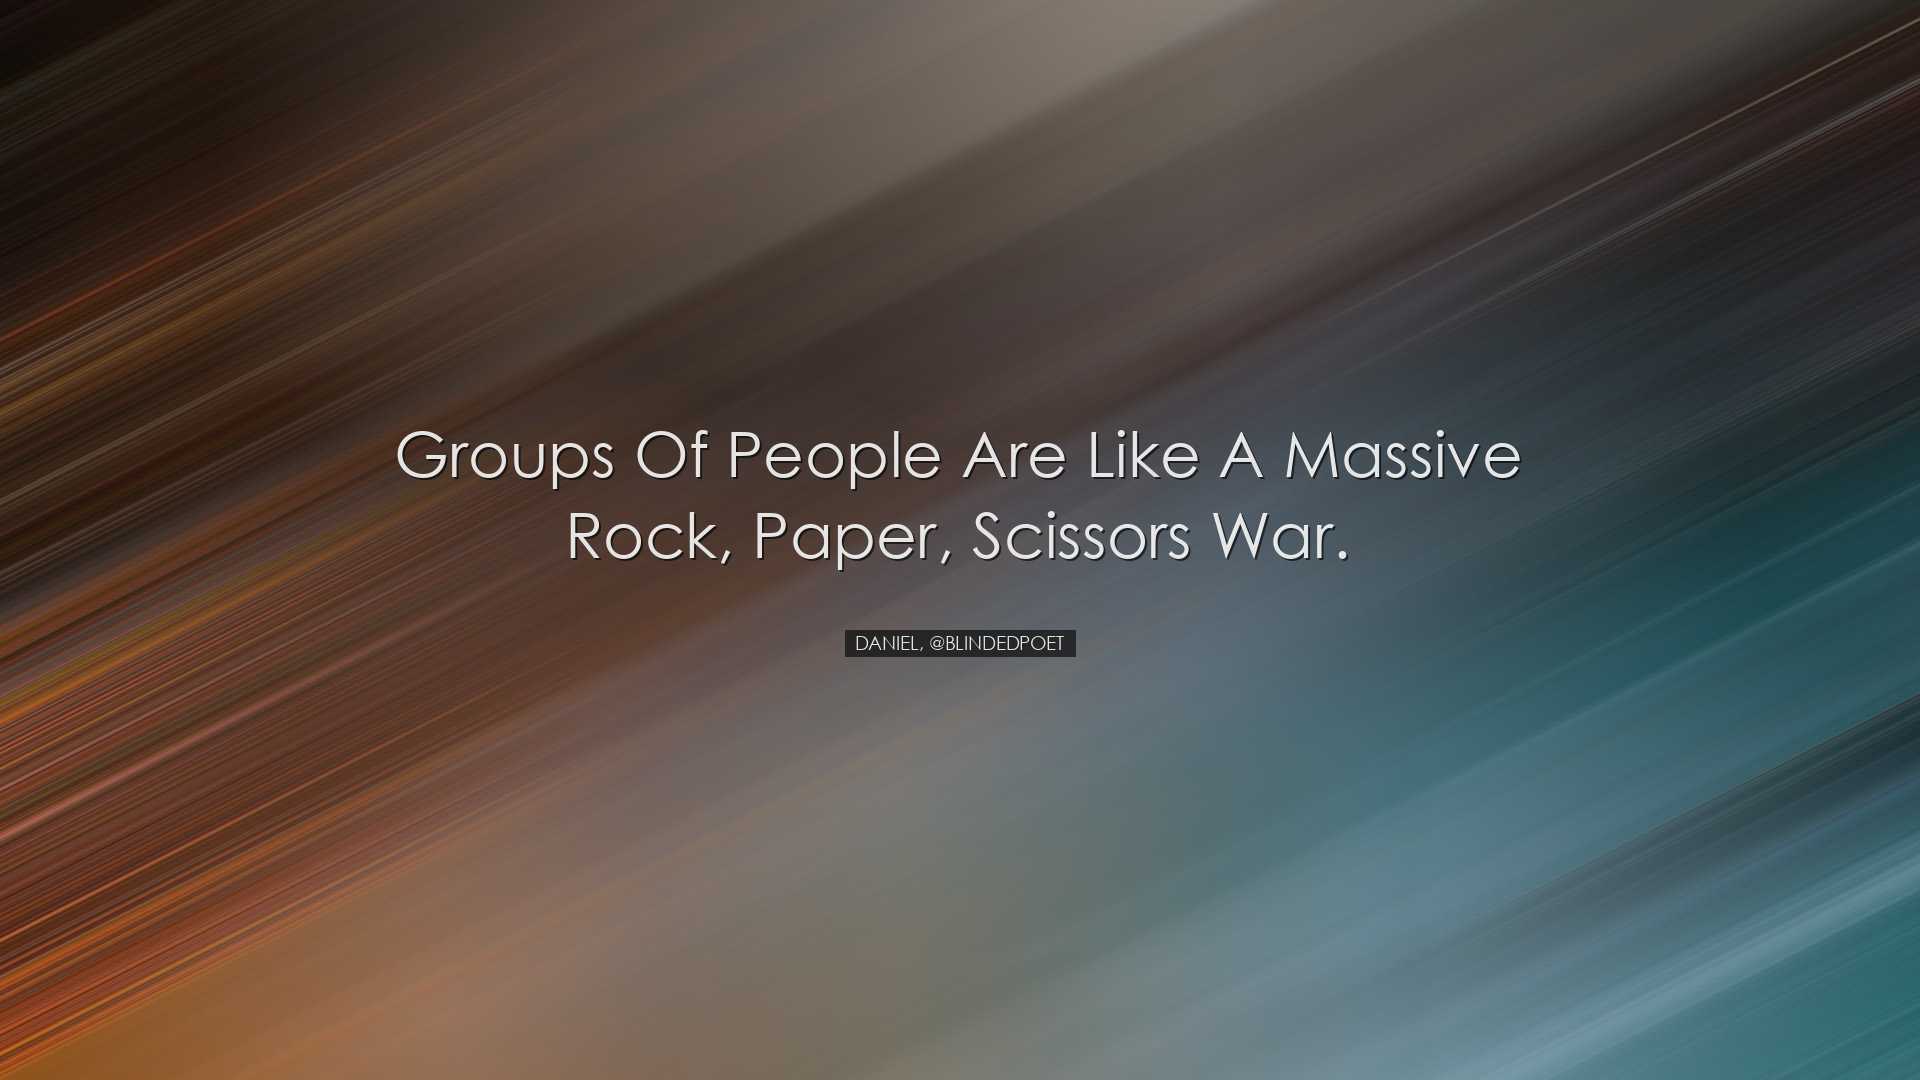 Groups of people are like a massive Rock, Paper, Scissors war. - D